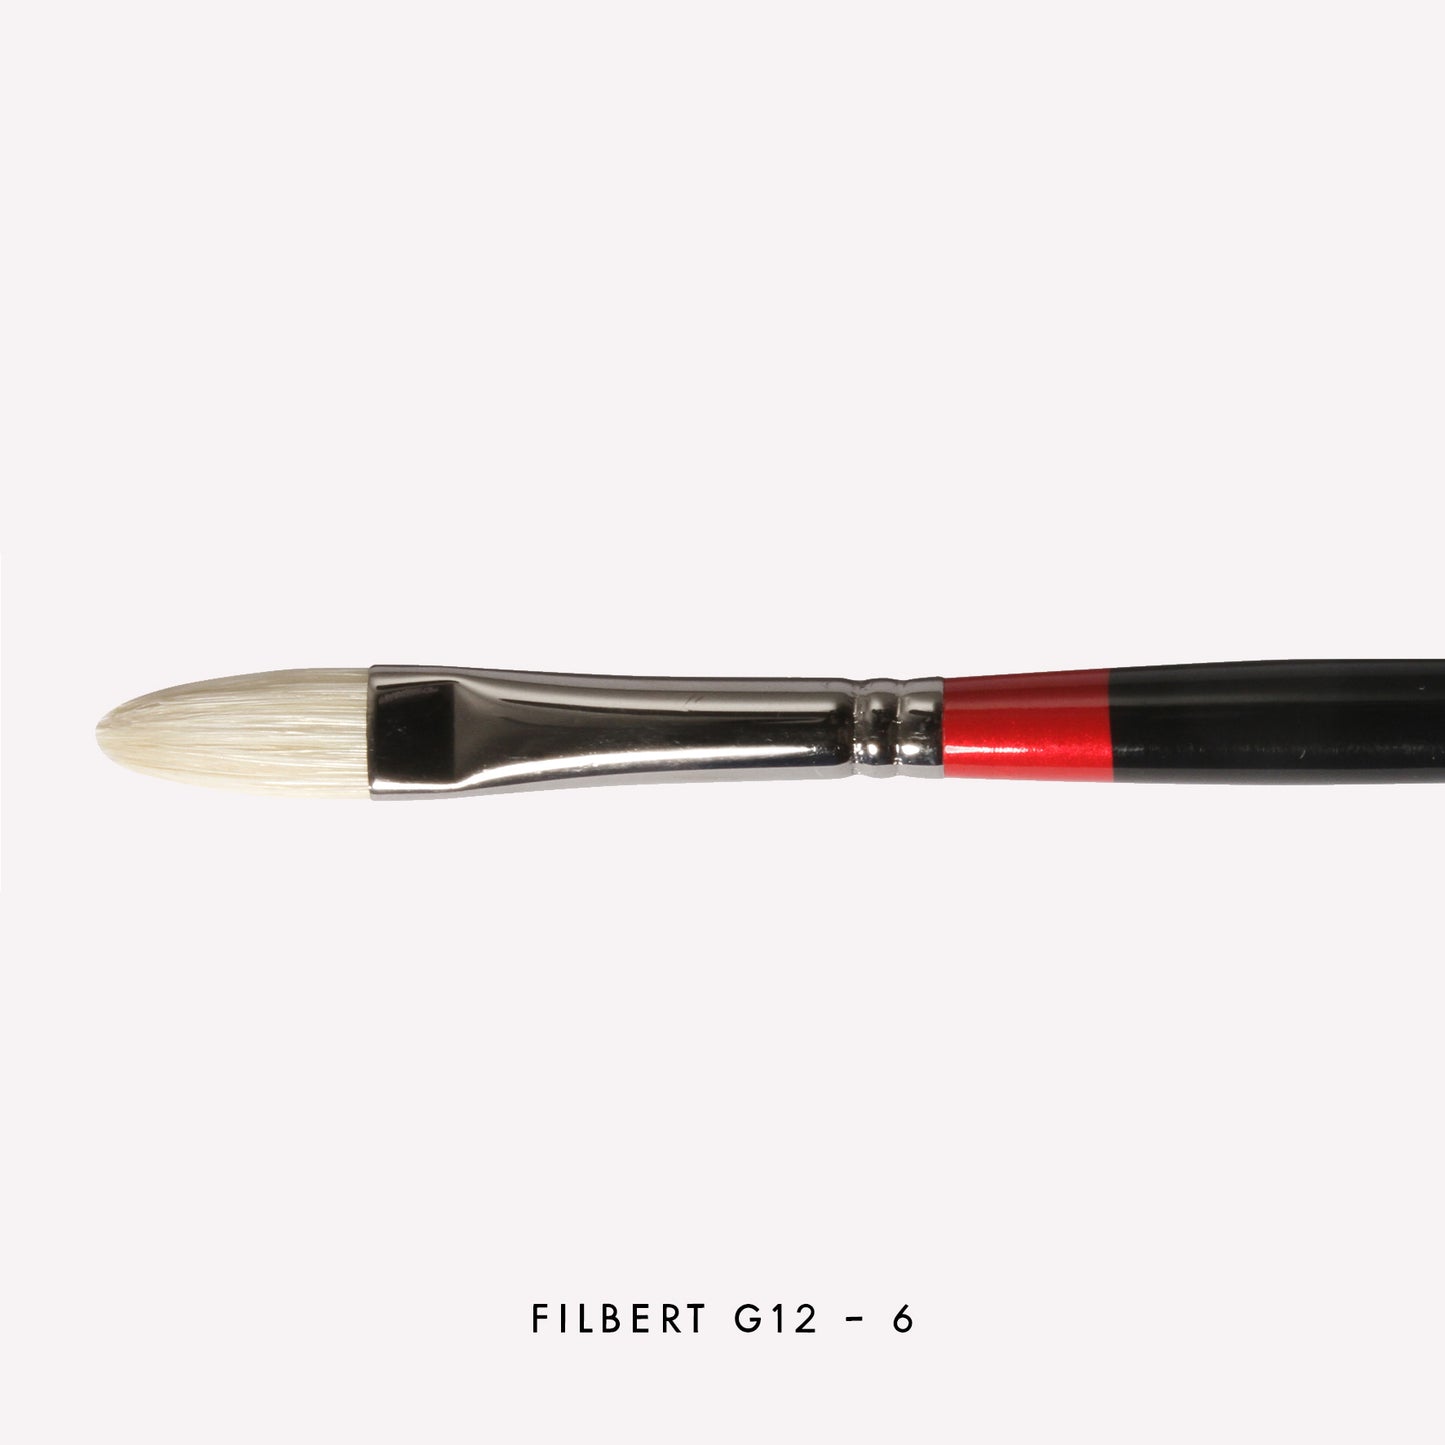 Daler-Rowney Georgian Filbert paintbrush in size G12-6 . Brushes have a classy black handle with red detailing and a silver ferrule. 